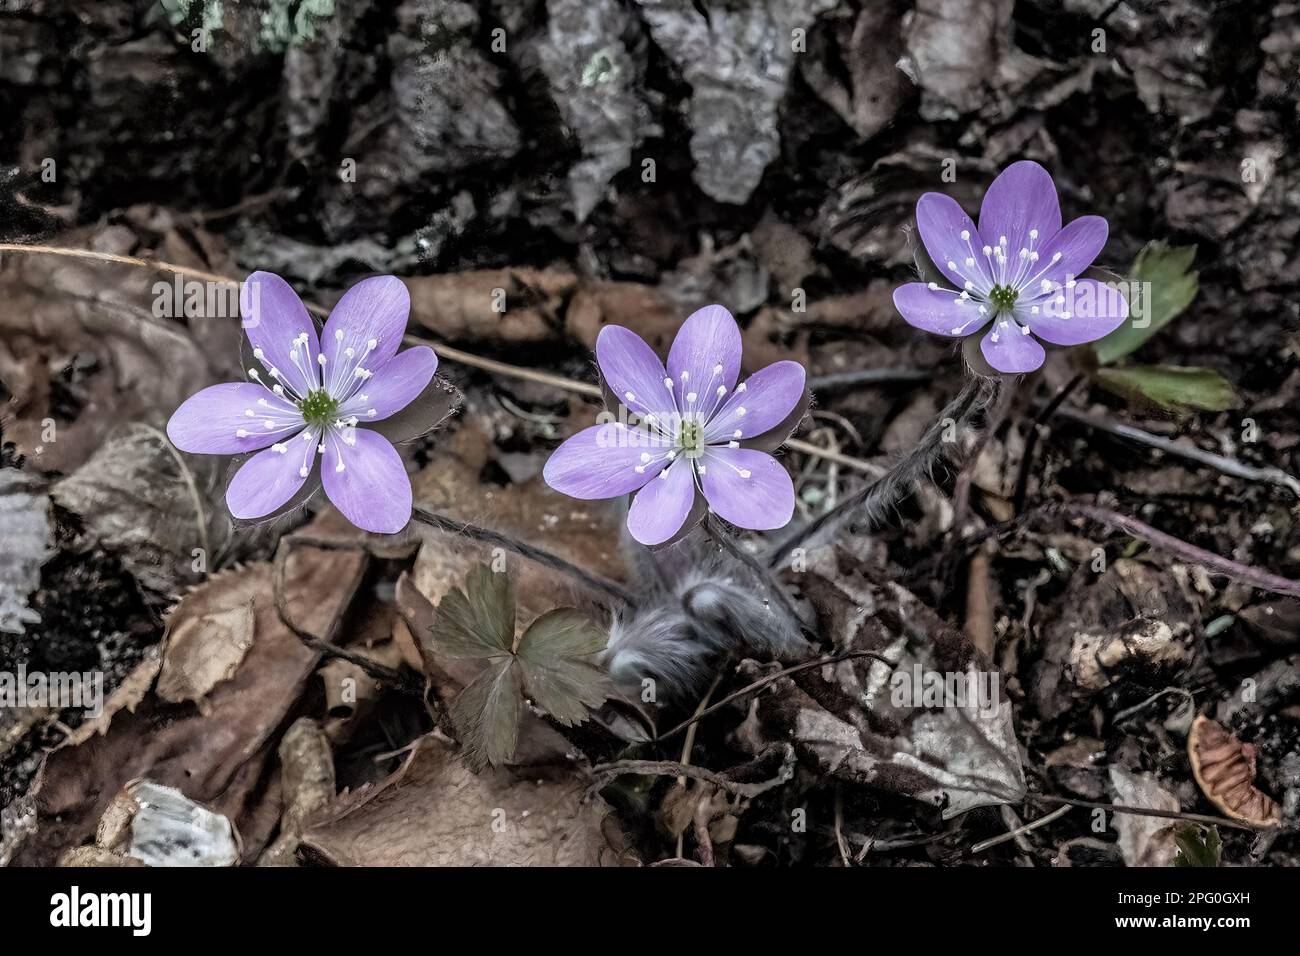 Purple hepatica wildflowers blooming in the springtime woods at Taylors Falls Lions Club South Park in Taylors Falls, Minnesota USA. Stock Photo